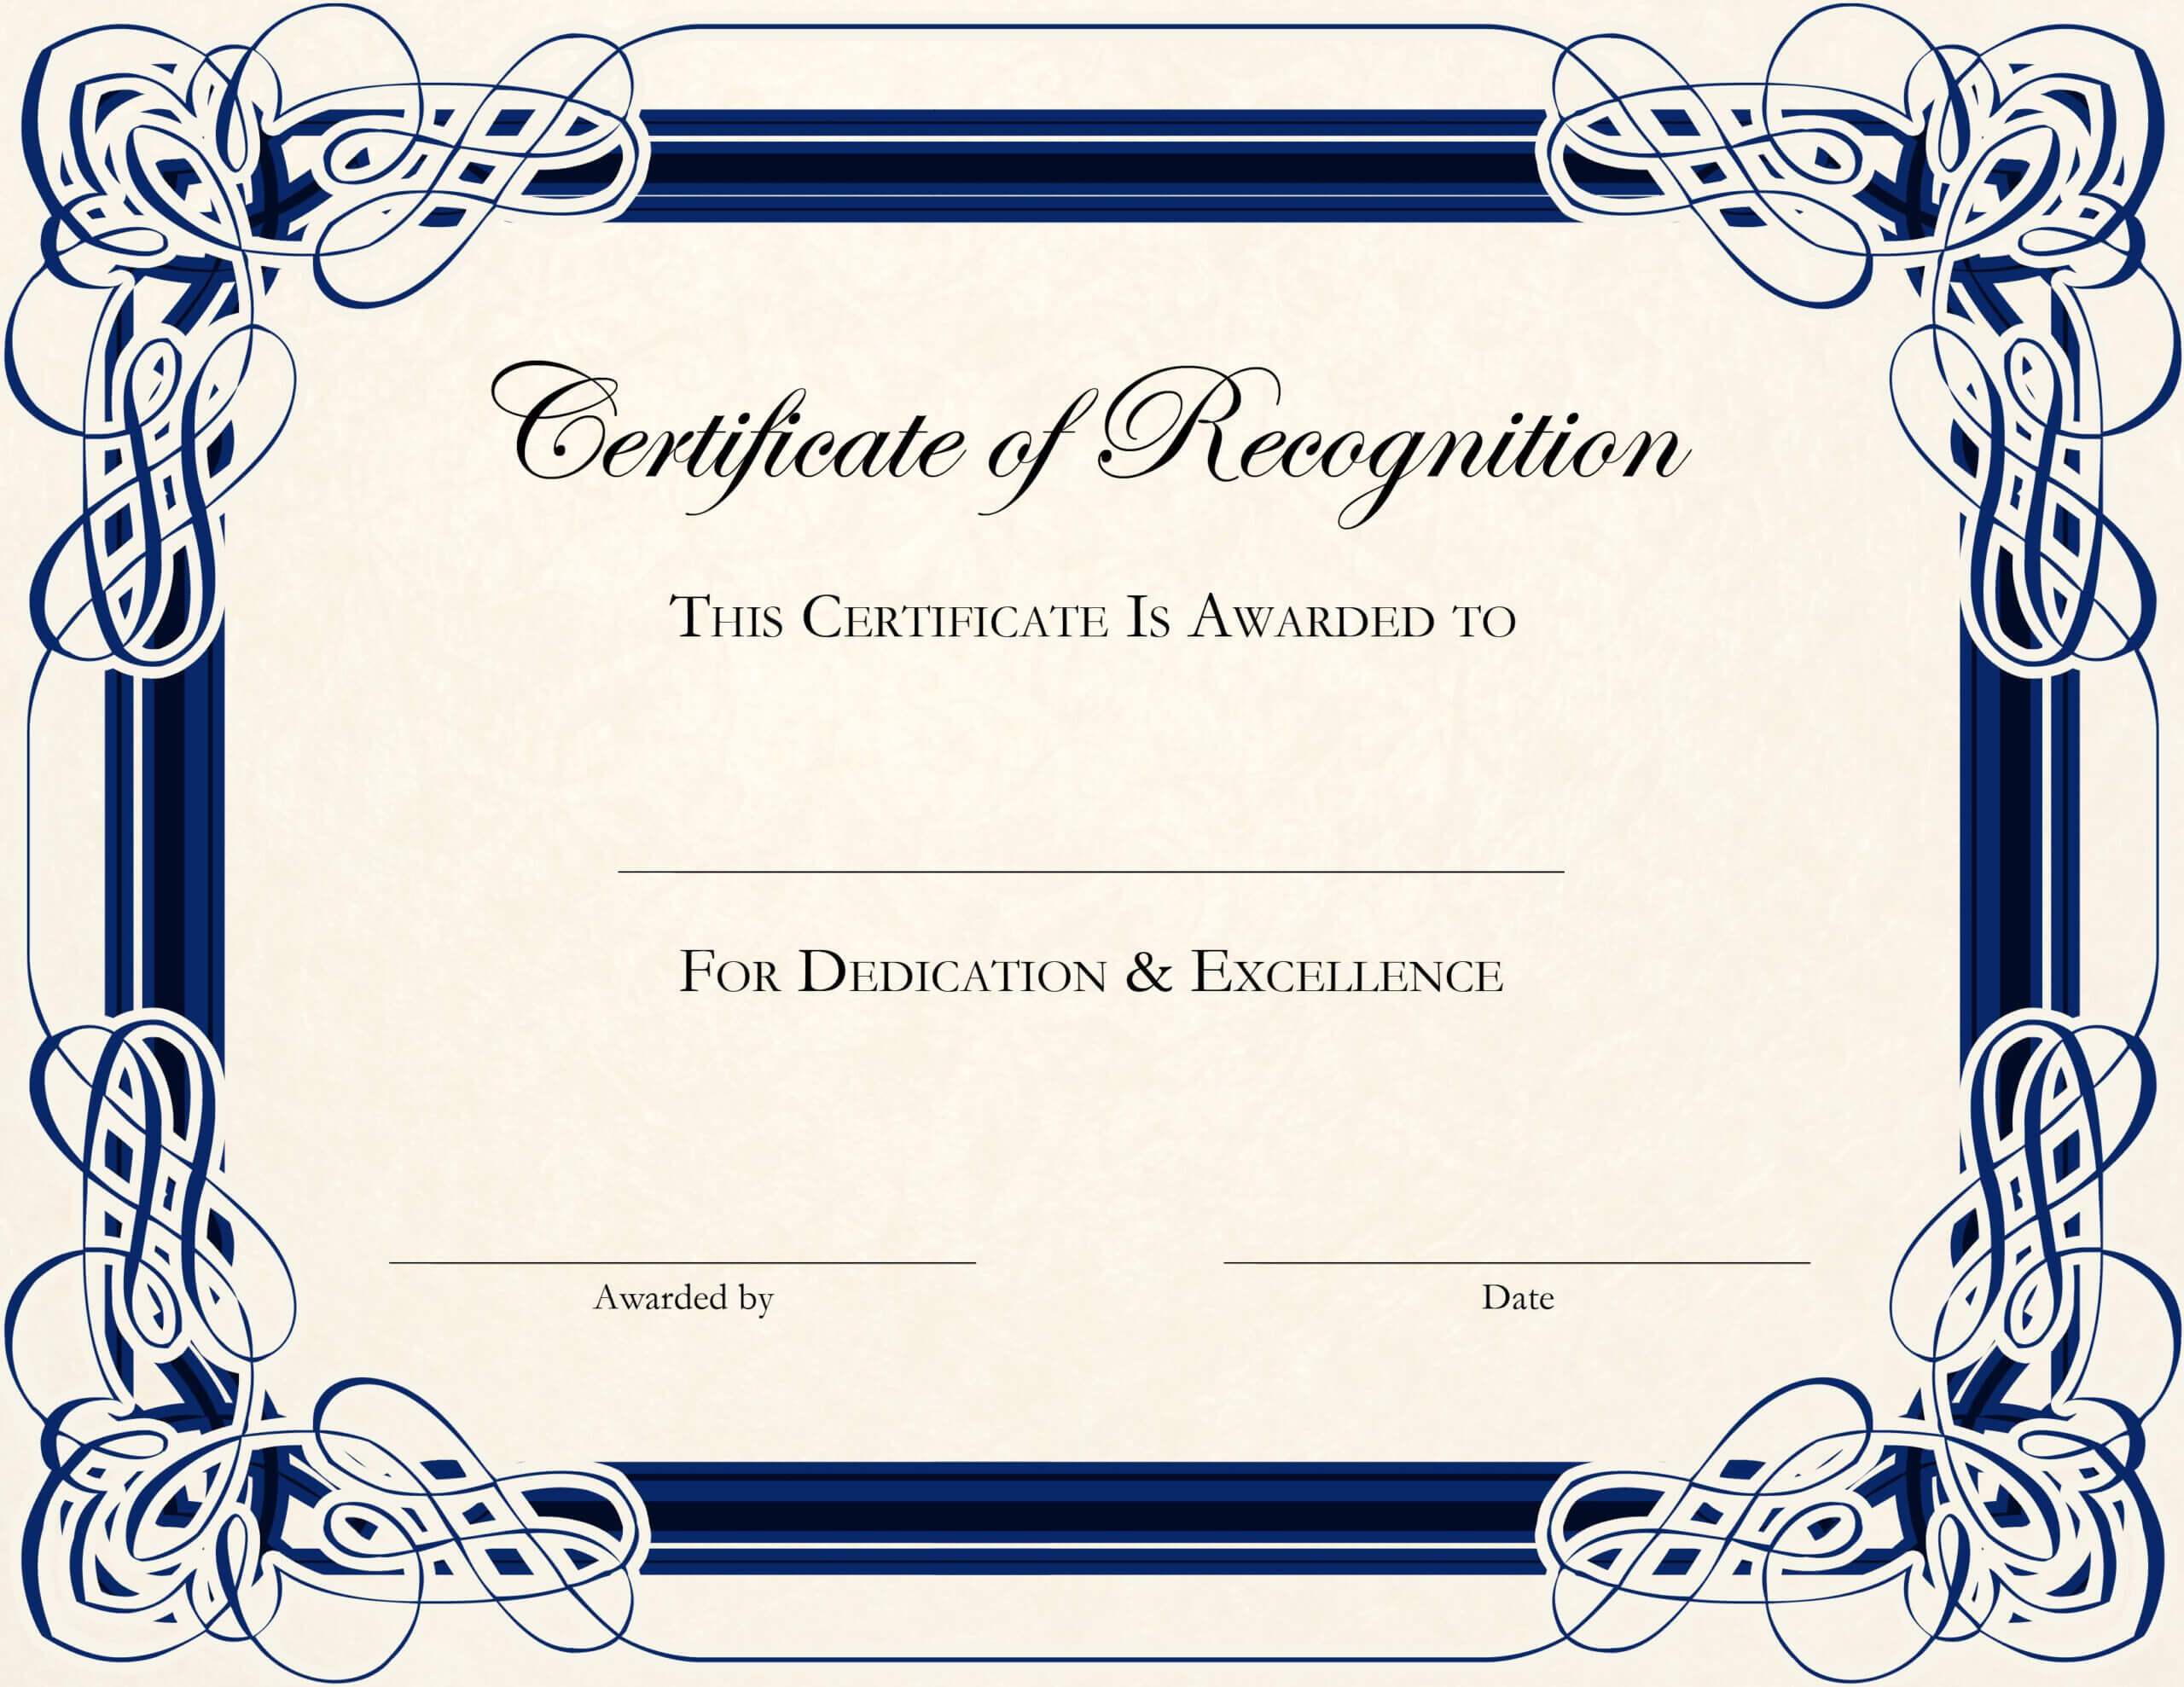 Anniversary Certificate Template Free - Calep.midnightpig.co With Anniversary Certificate Template Free